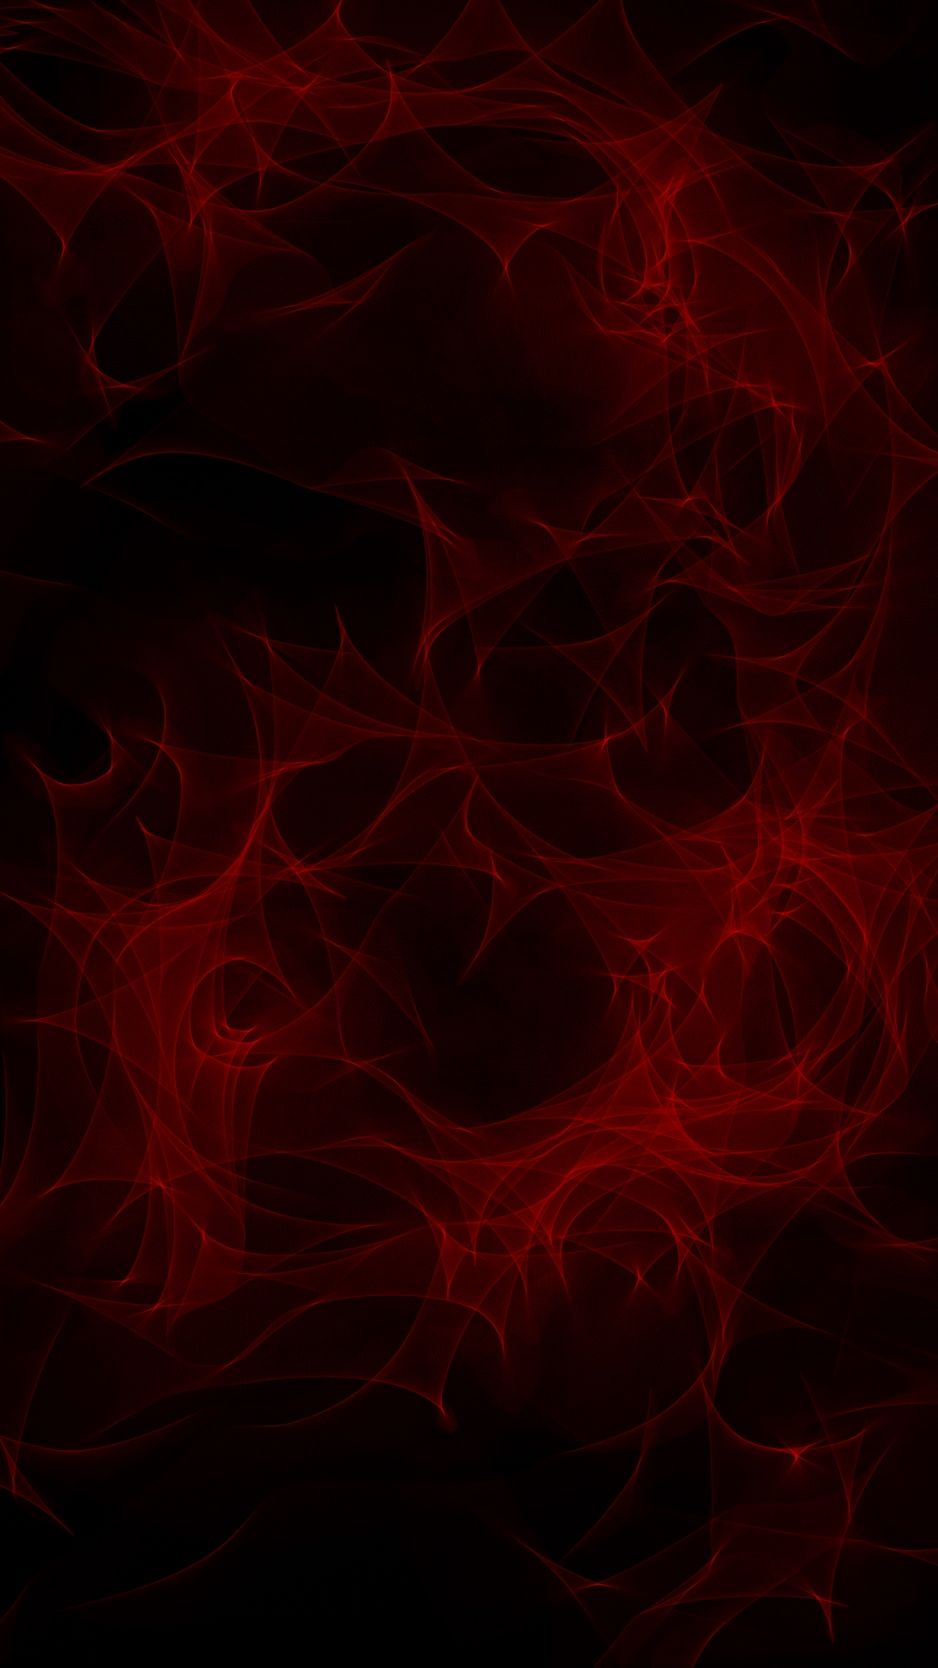 Red And Black Iphone Wallpapers 4k Hd Red And Black Iphone Backgrounds On Wallpaperbat